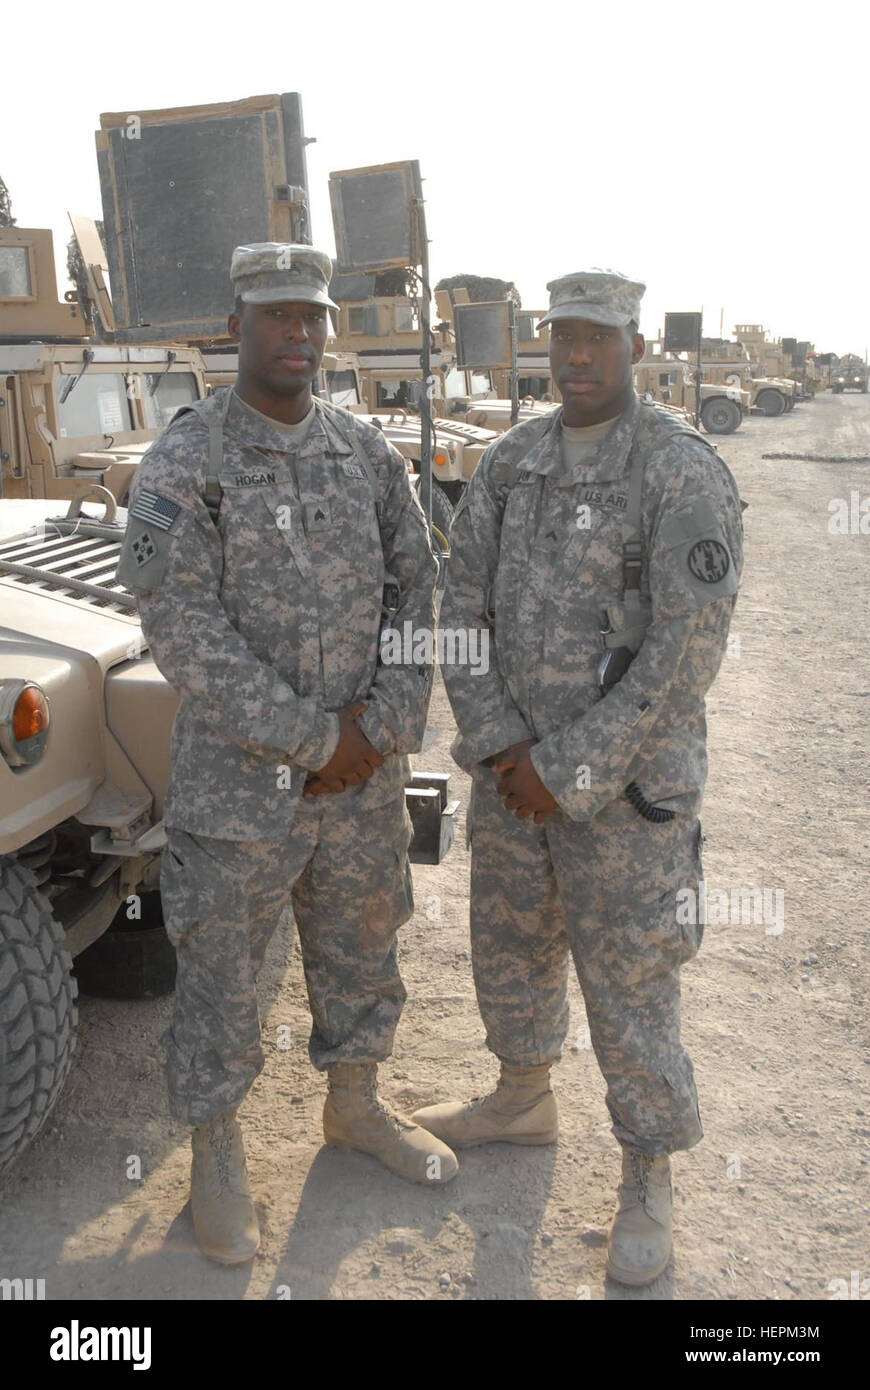 Sgt. Ray Hogan (left) and his brother, Cpl. Roland Hogan, natives of Long Branch, N.J., are both military police Soldiers assigned to the 978th Military Police Company and serving in Baghdad as they conduct Police Transition Team operations at local Iraqi police stations. The 978th MP Co. is deployed from Fort Bliss, Texas, and is currently assigned to the 716th Military Police Battalion, 18th Military Police Brigade, Multi-National Division - Baghdad. Brothers serve together as Baghdad 'cops' 113890 Stock Photo